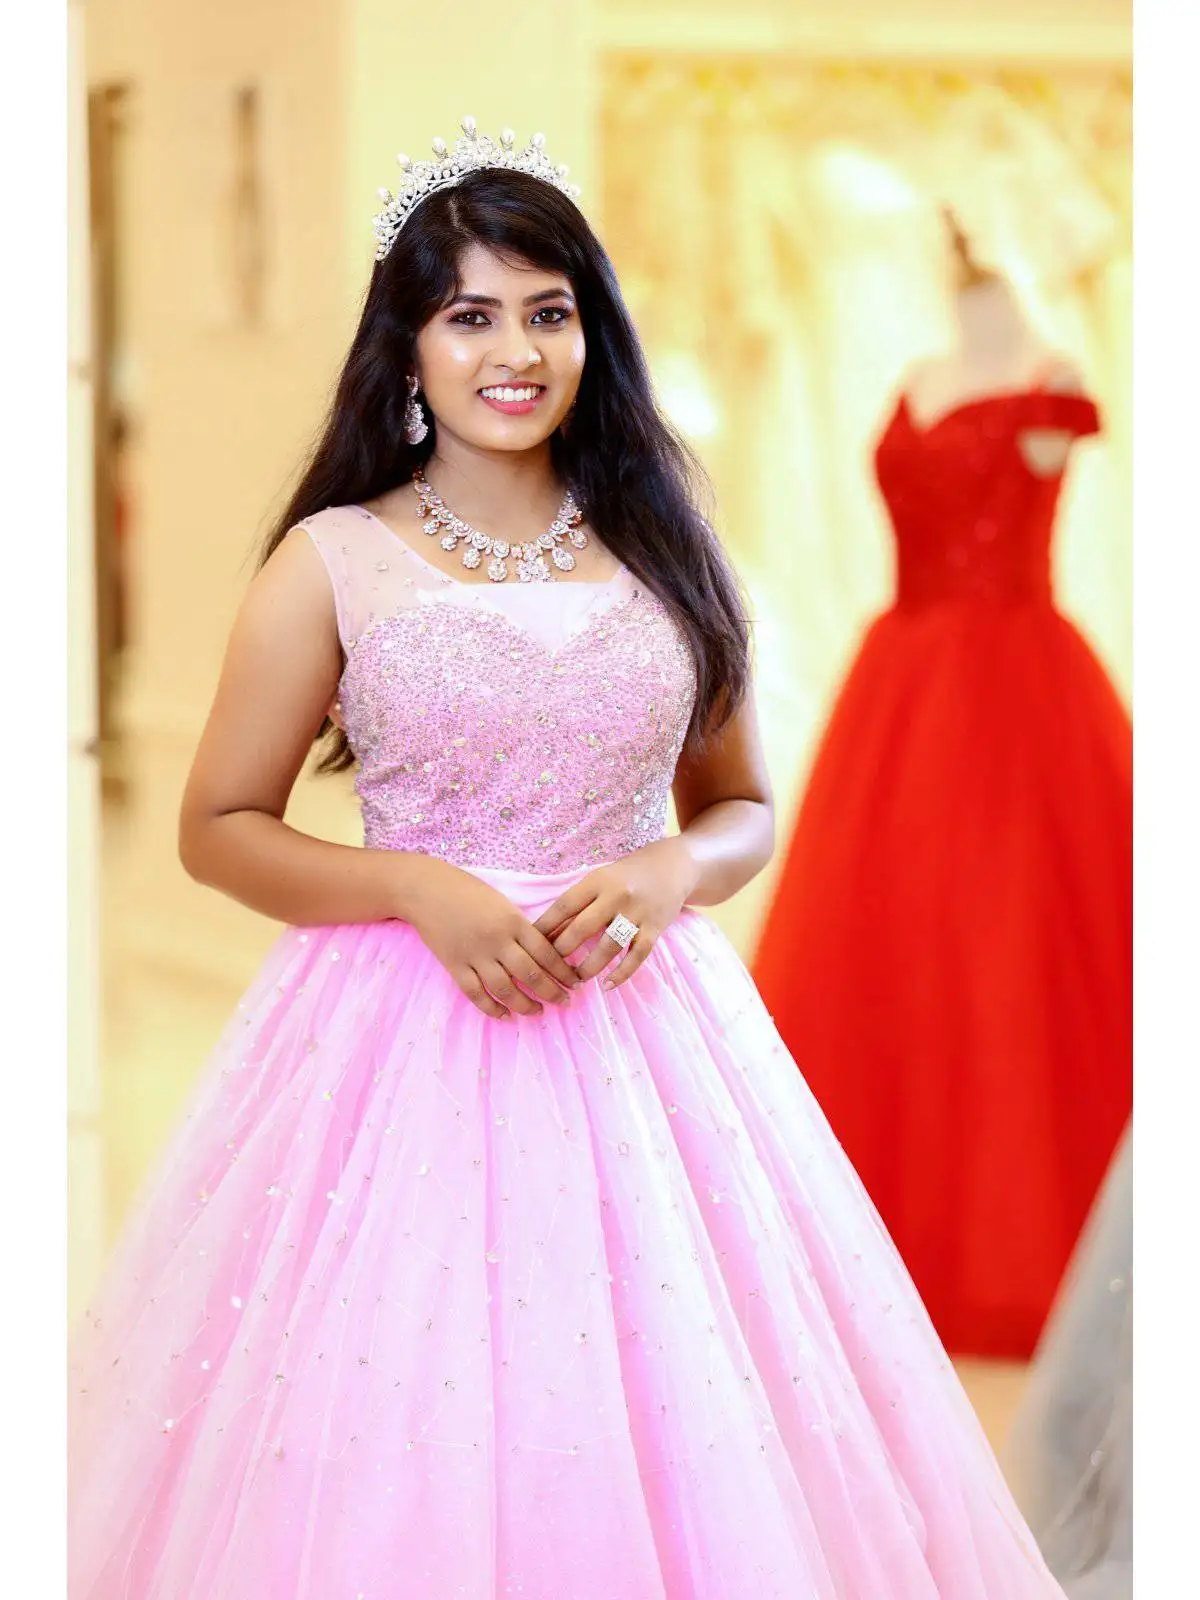 Light Pink Ball Gown Adorned with Beads and Waist Belt